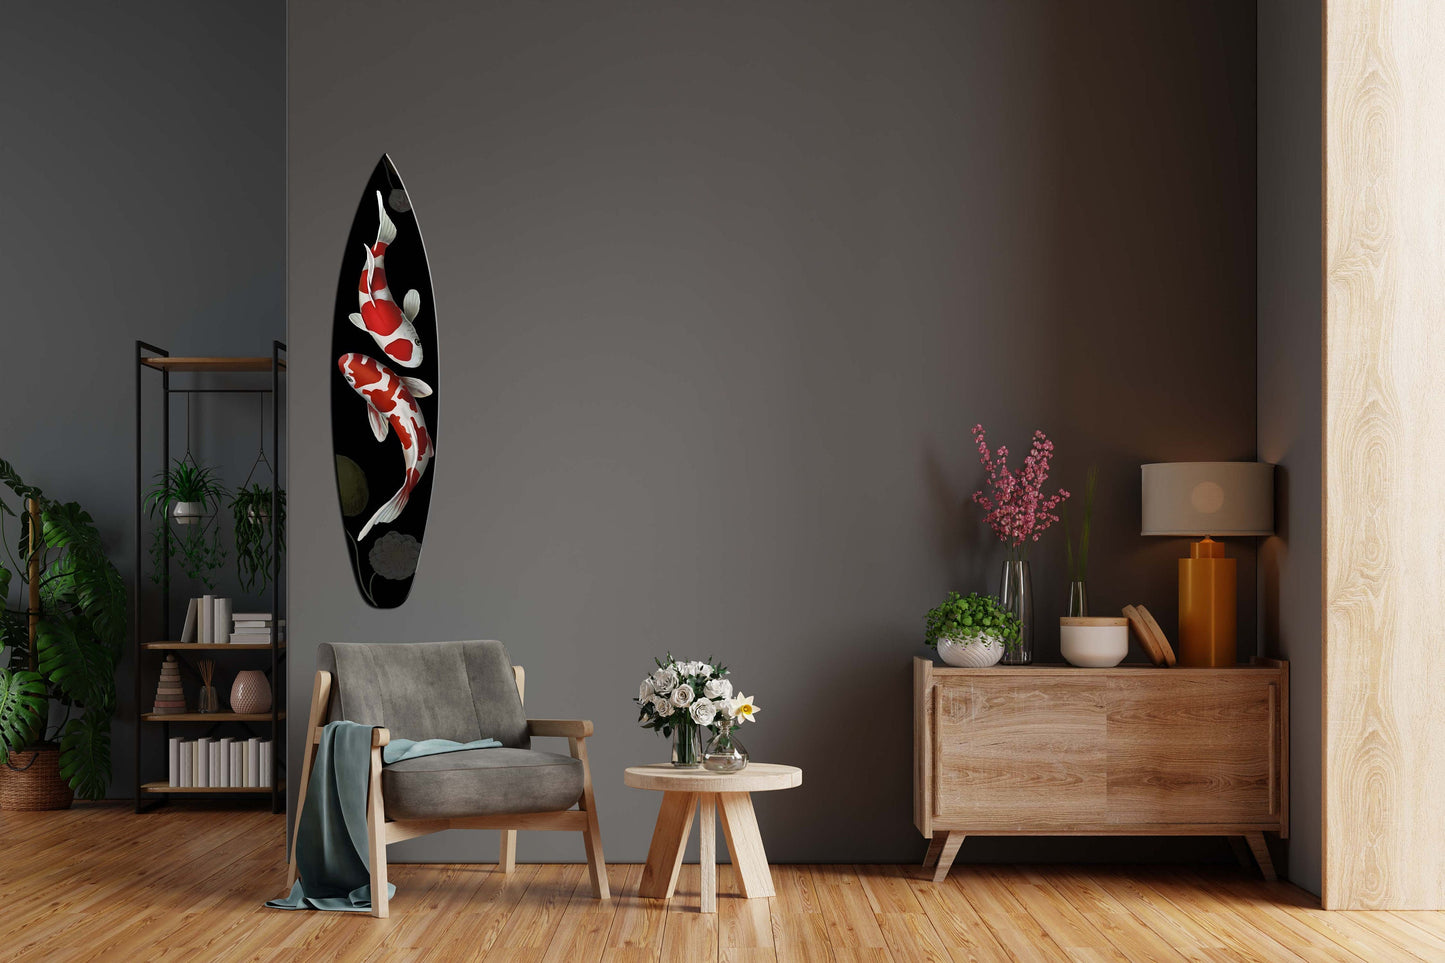 Decorative Surfboard Wall Artwork with Fish Pattern